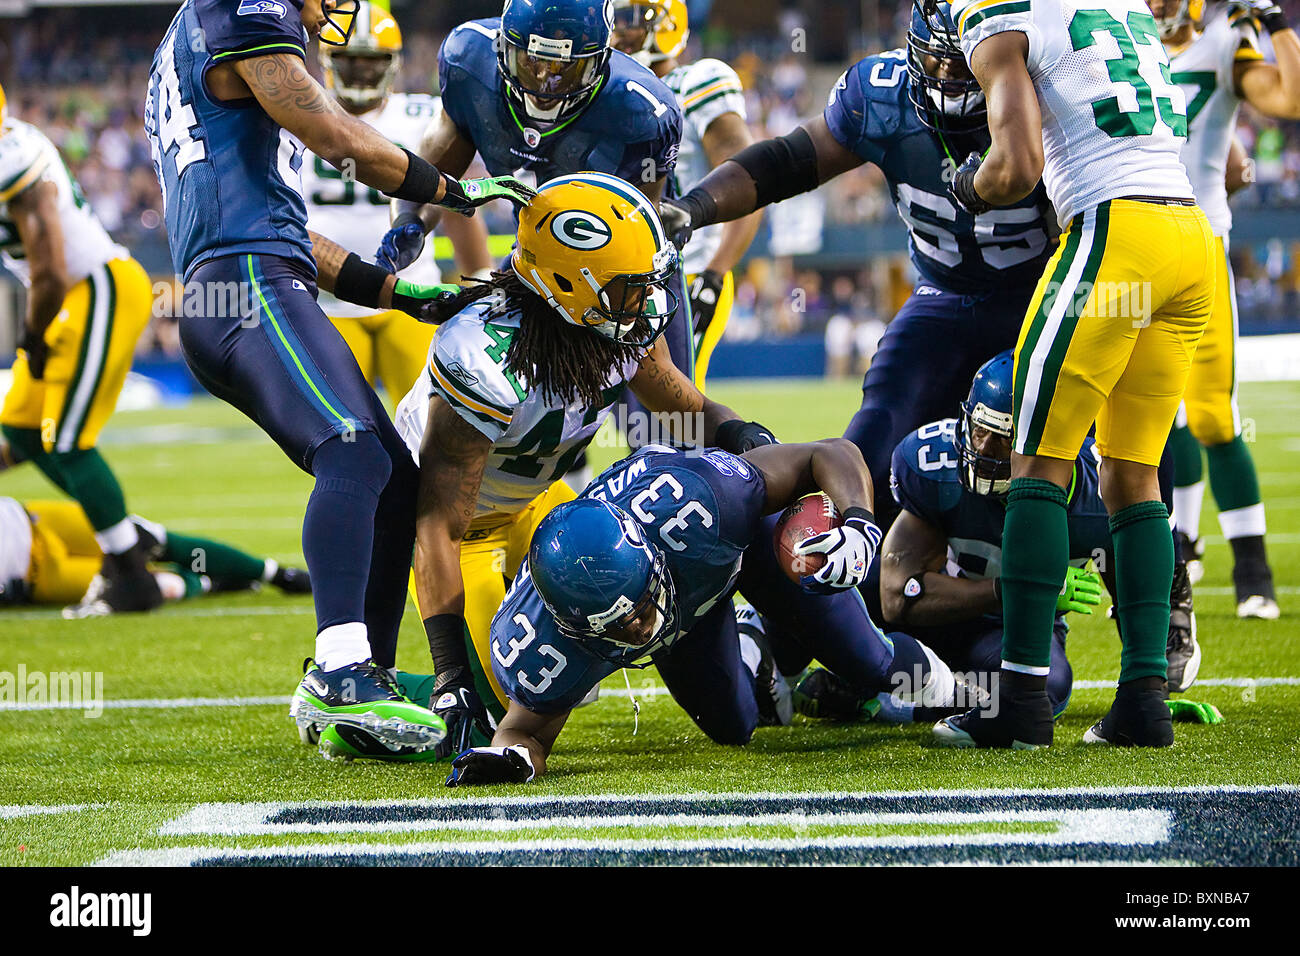 Seattle Seahawks playing the Green Bay Packers in an NFL Football game Stock Photo